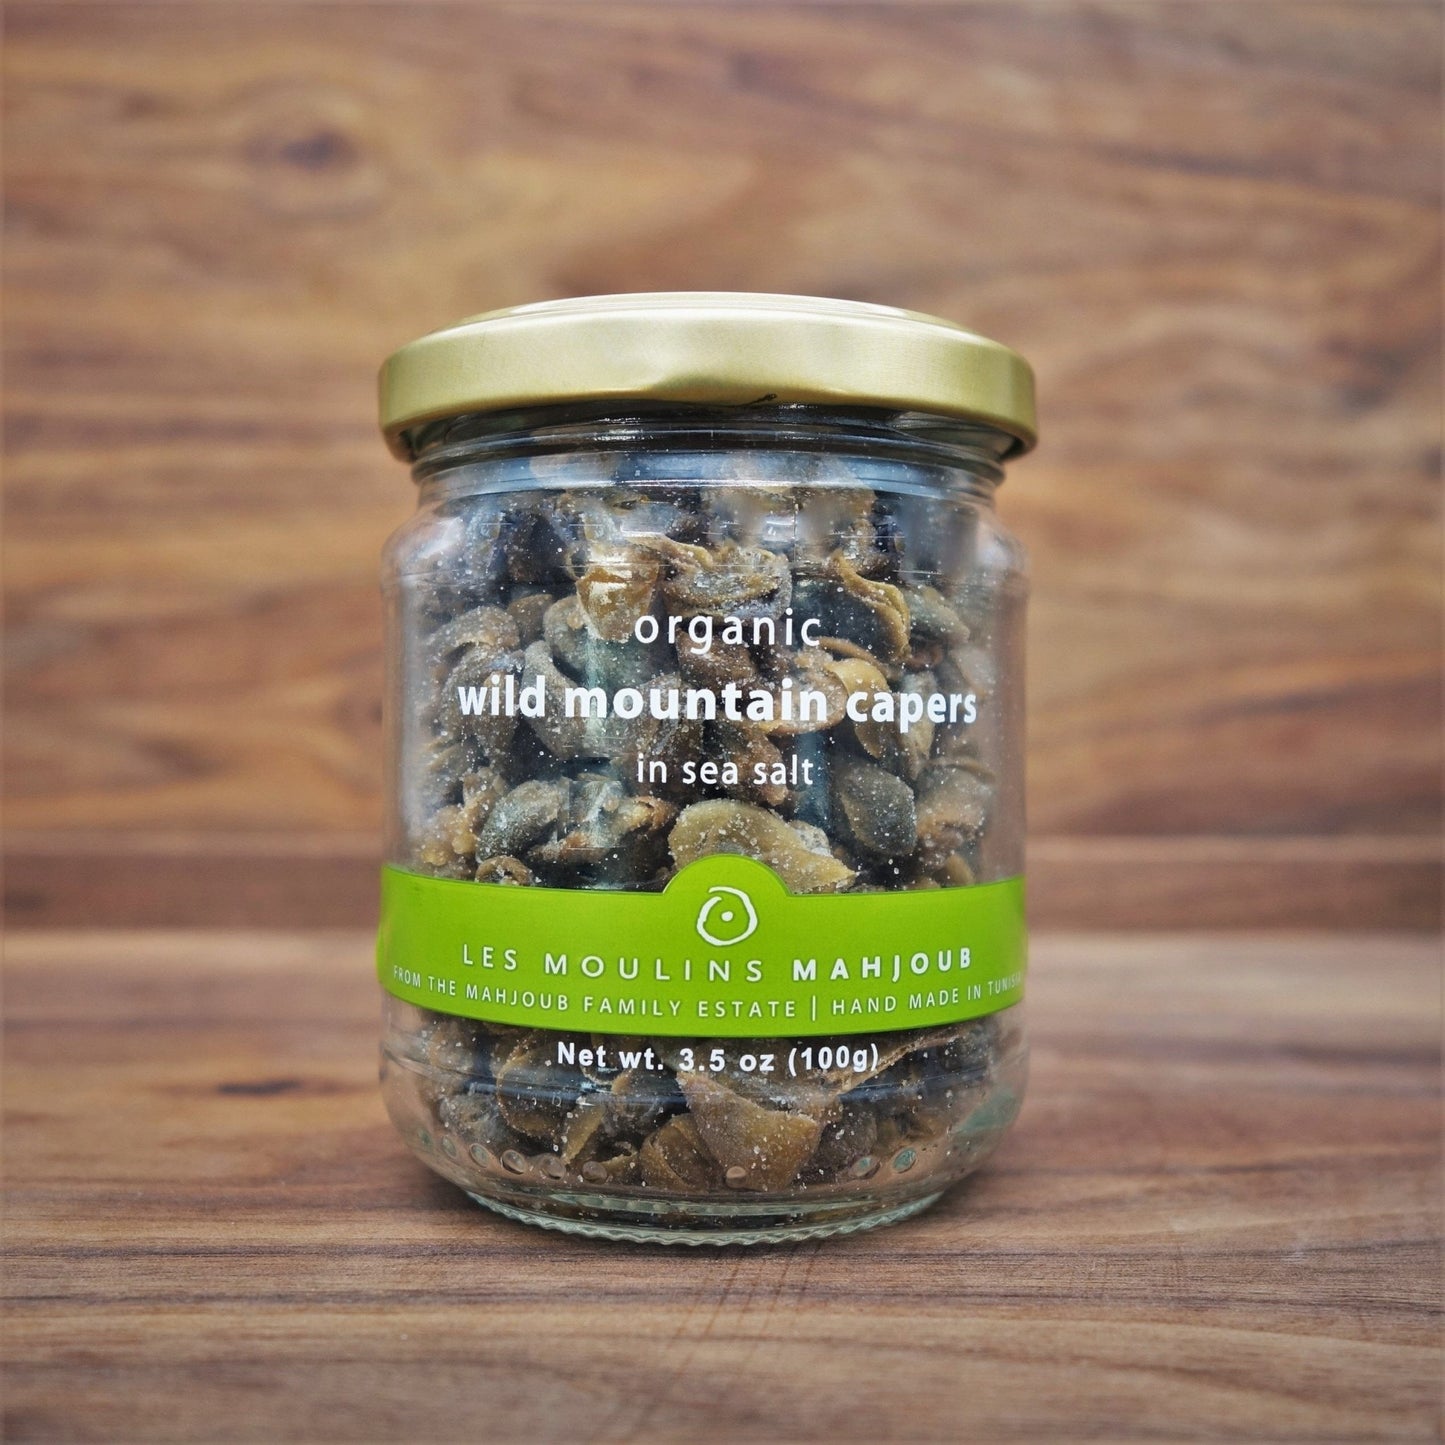 Les Moulins Mahjoub - Wild Mountain Capers - Mongers' Provisions